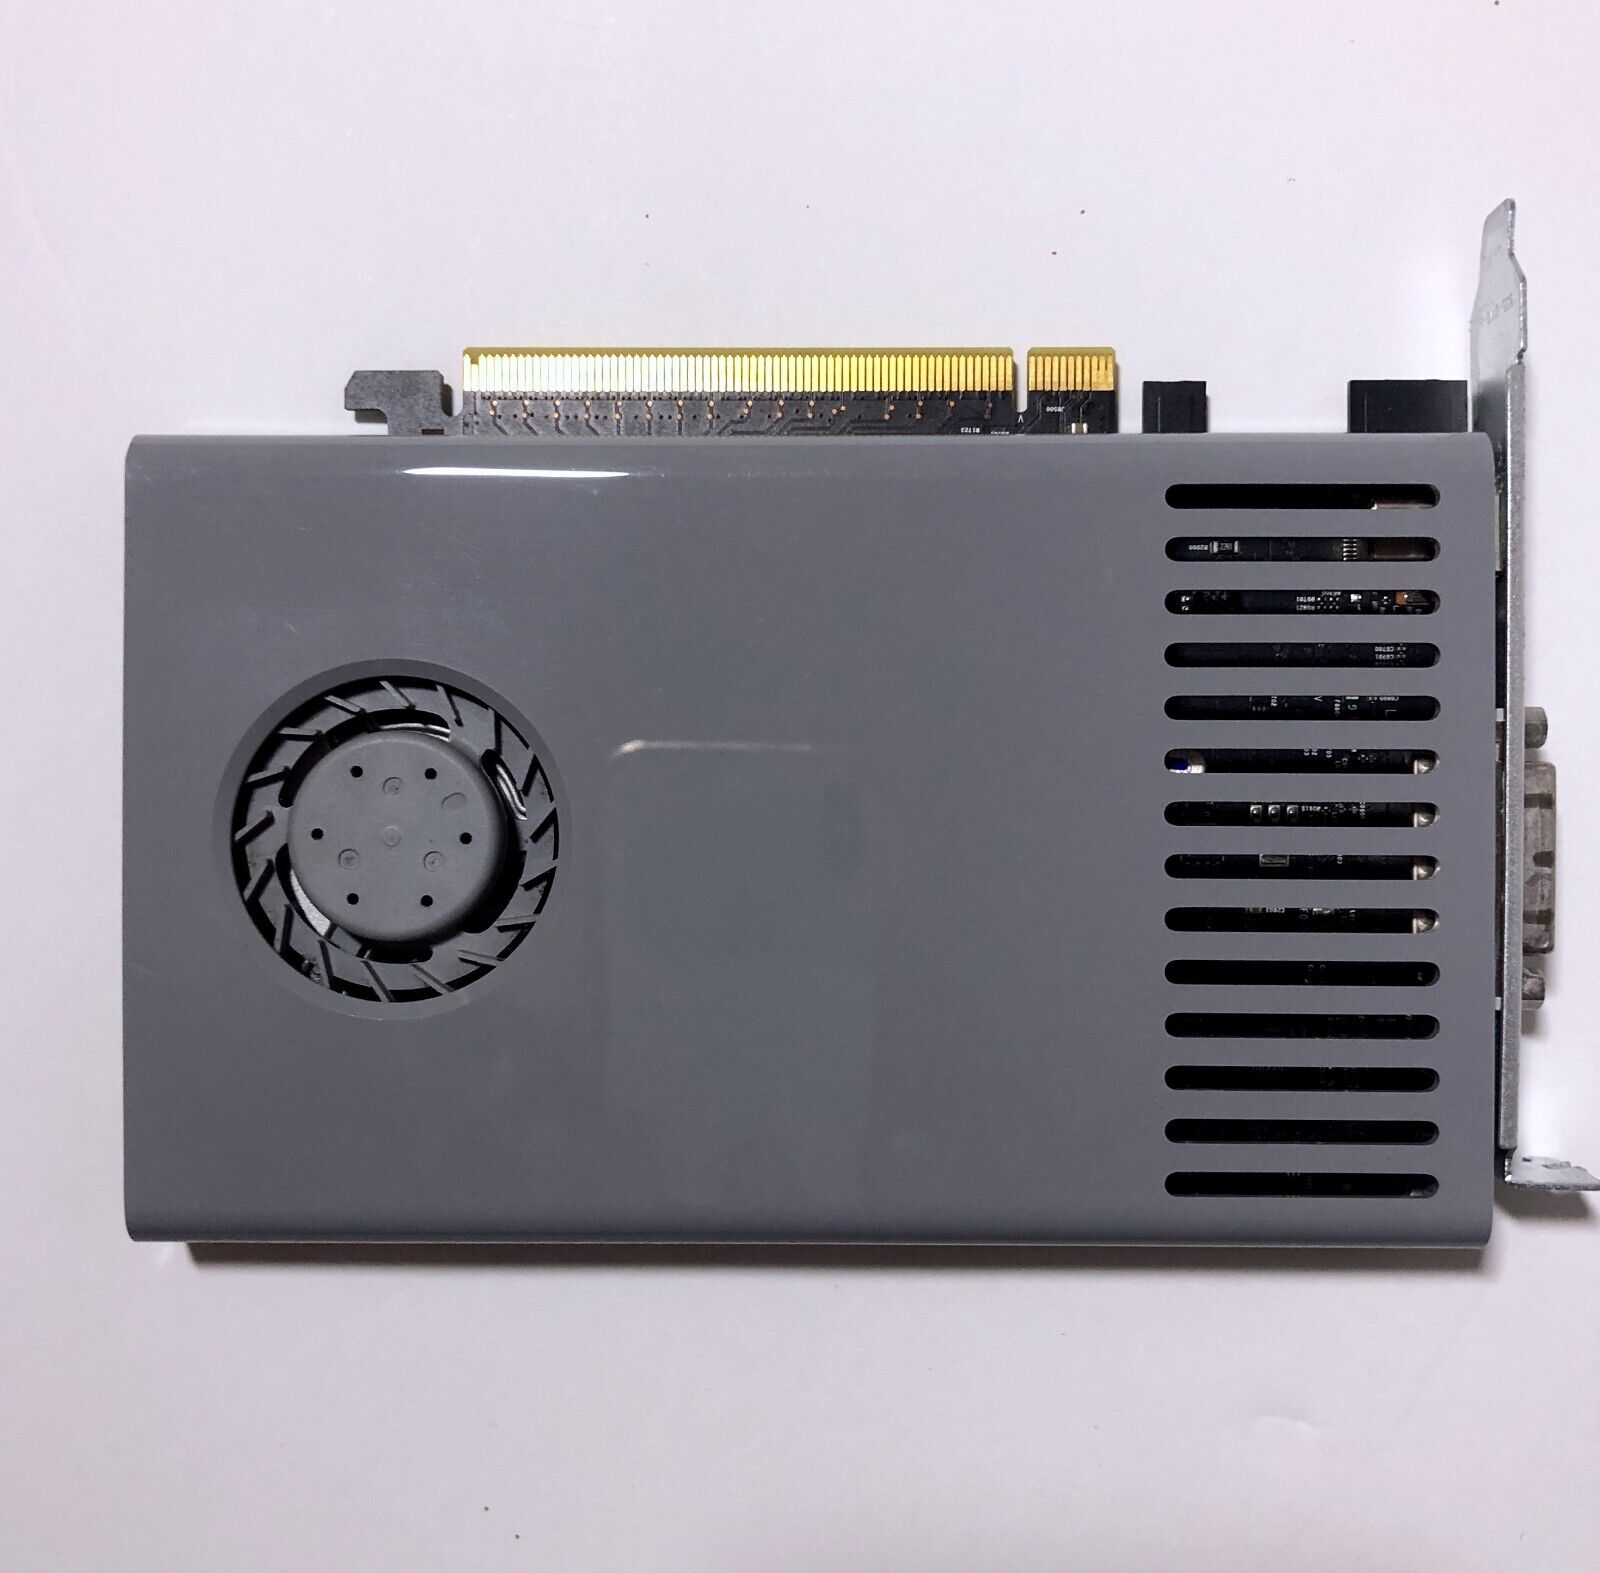 NVIDIA GeForce GT 120 512MB Graphics Card for Apple Mac Pro 2008-2012 (A1310)